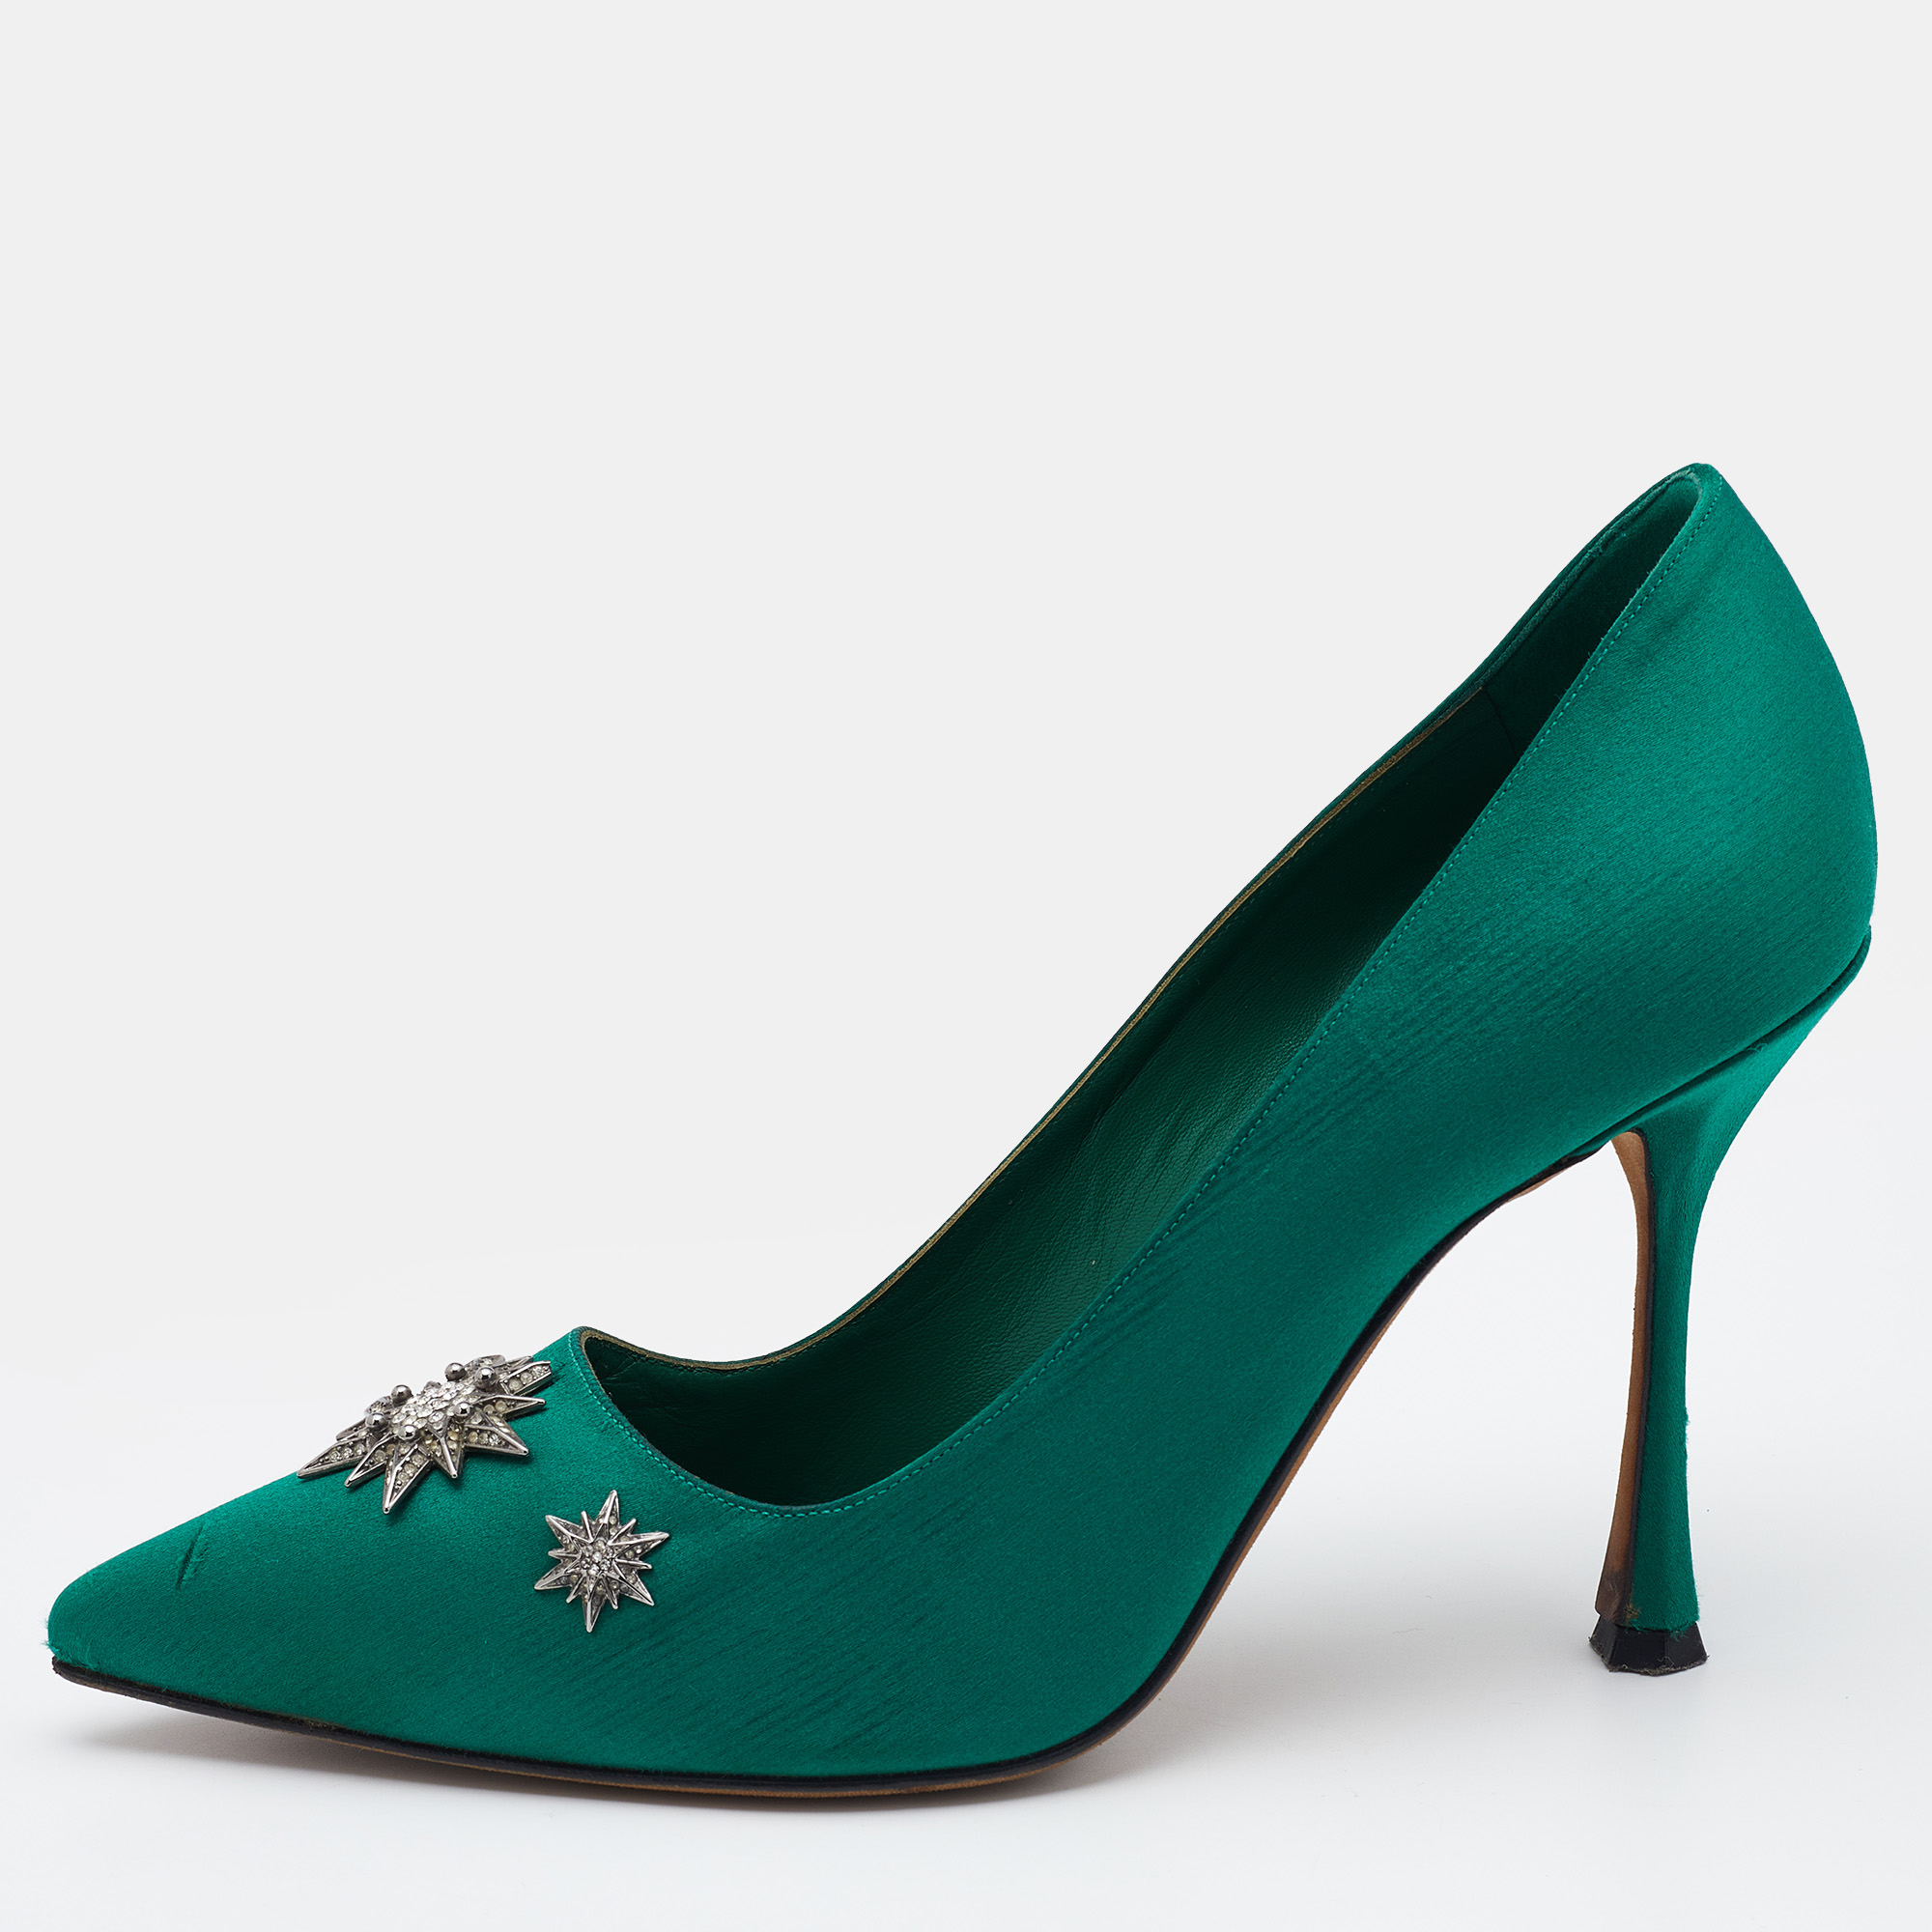 Pre-owned Manolo Blahnik Green Satin Embellished Pointed Toe Pumps Size 37.5